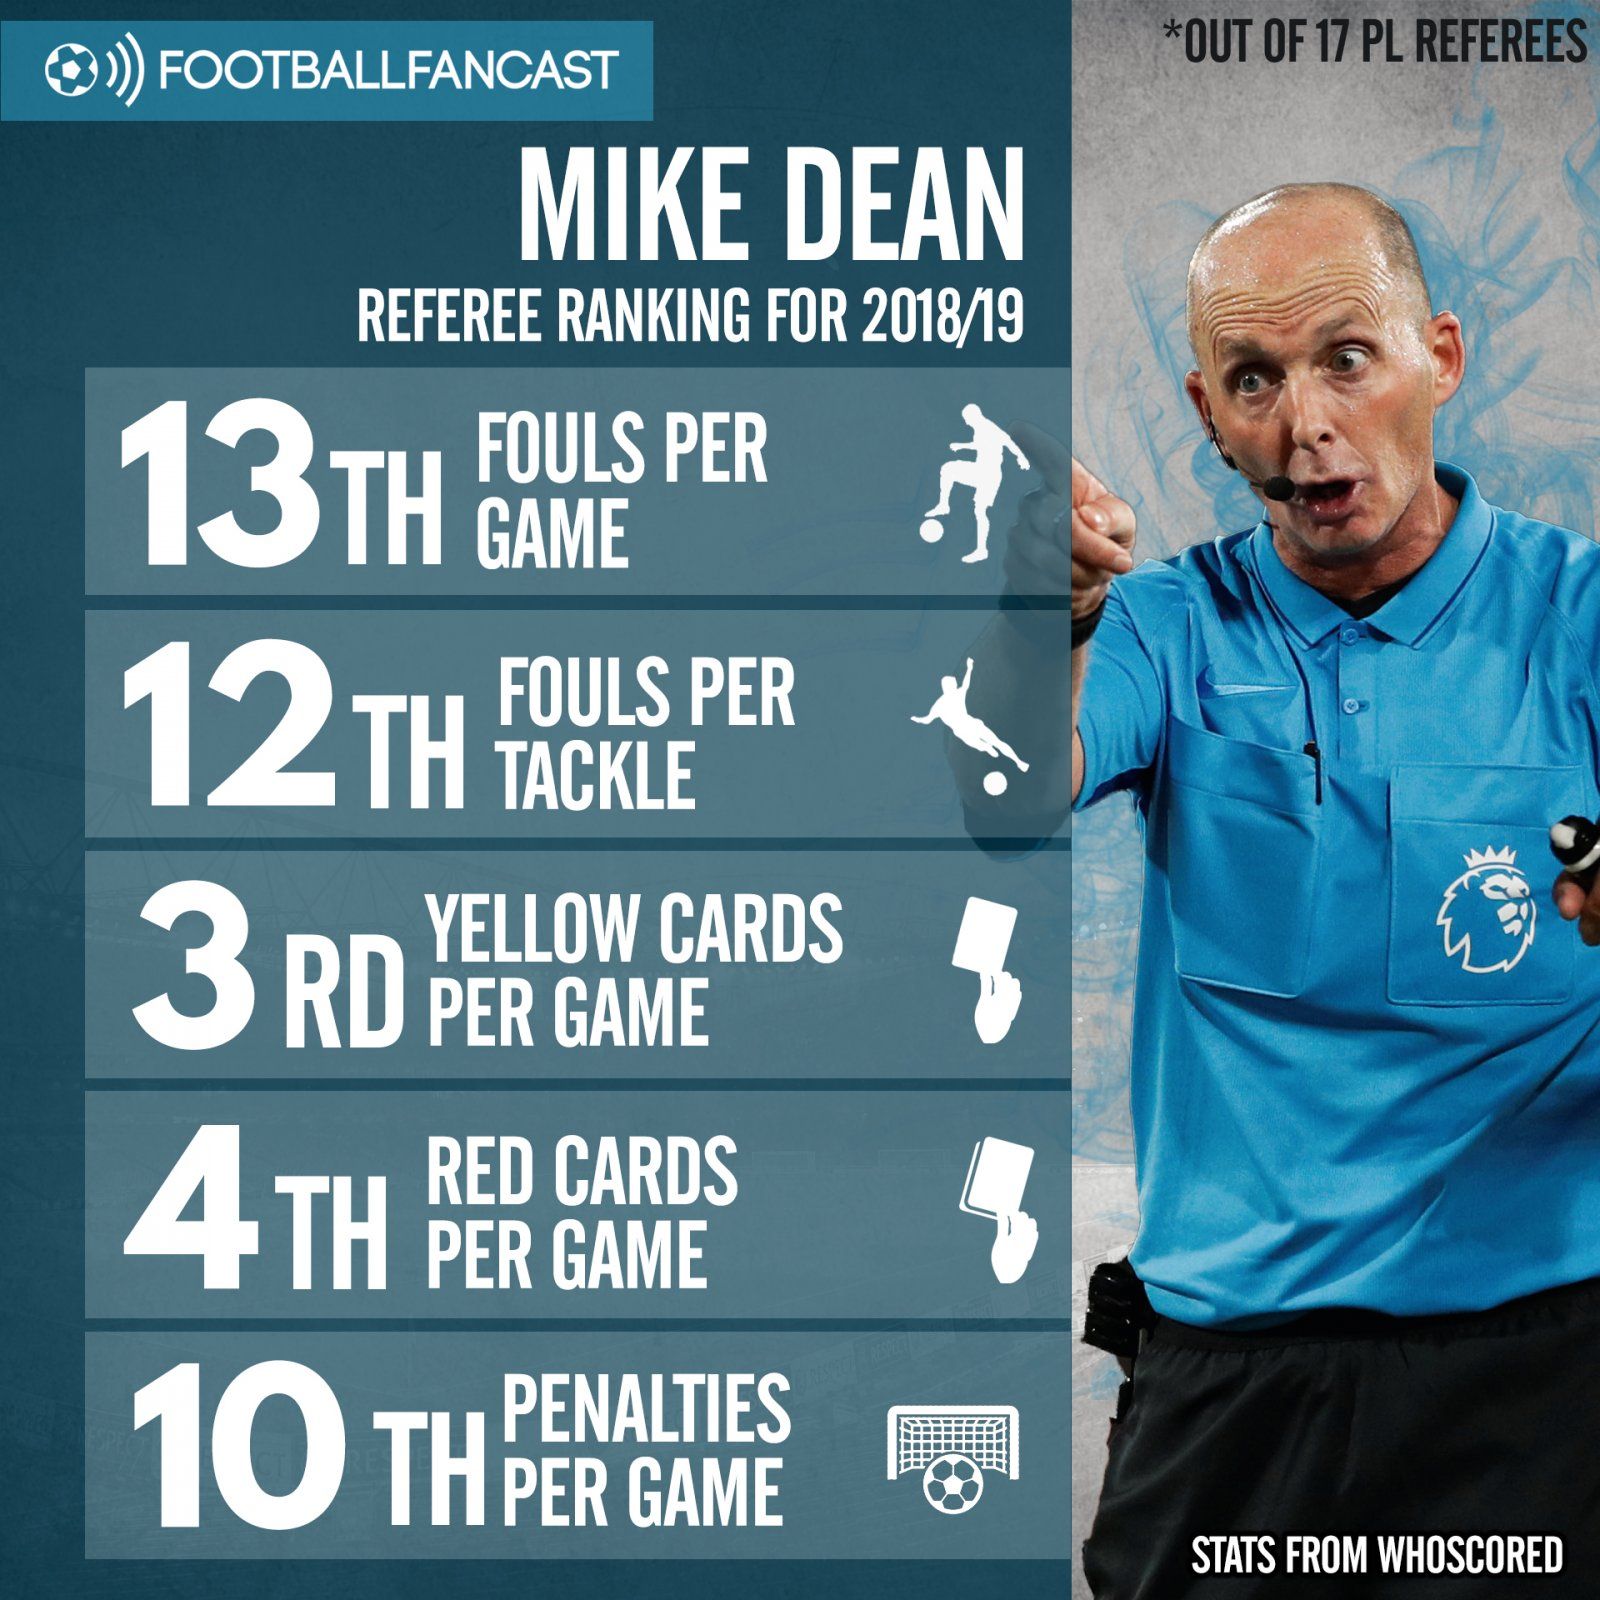 Mike Dean - Referee Stats this season